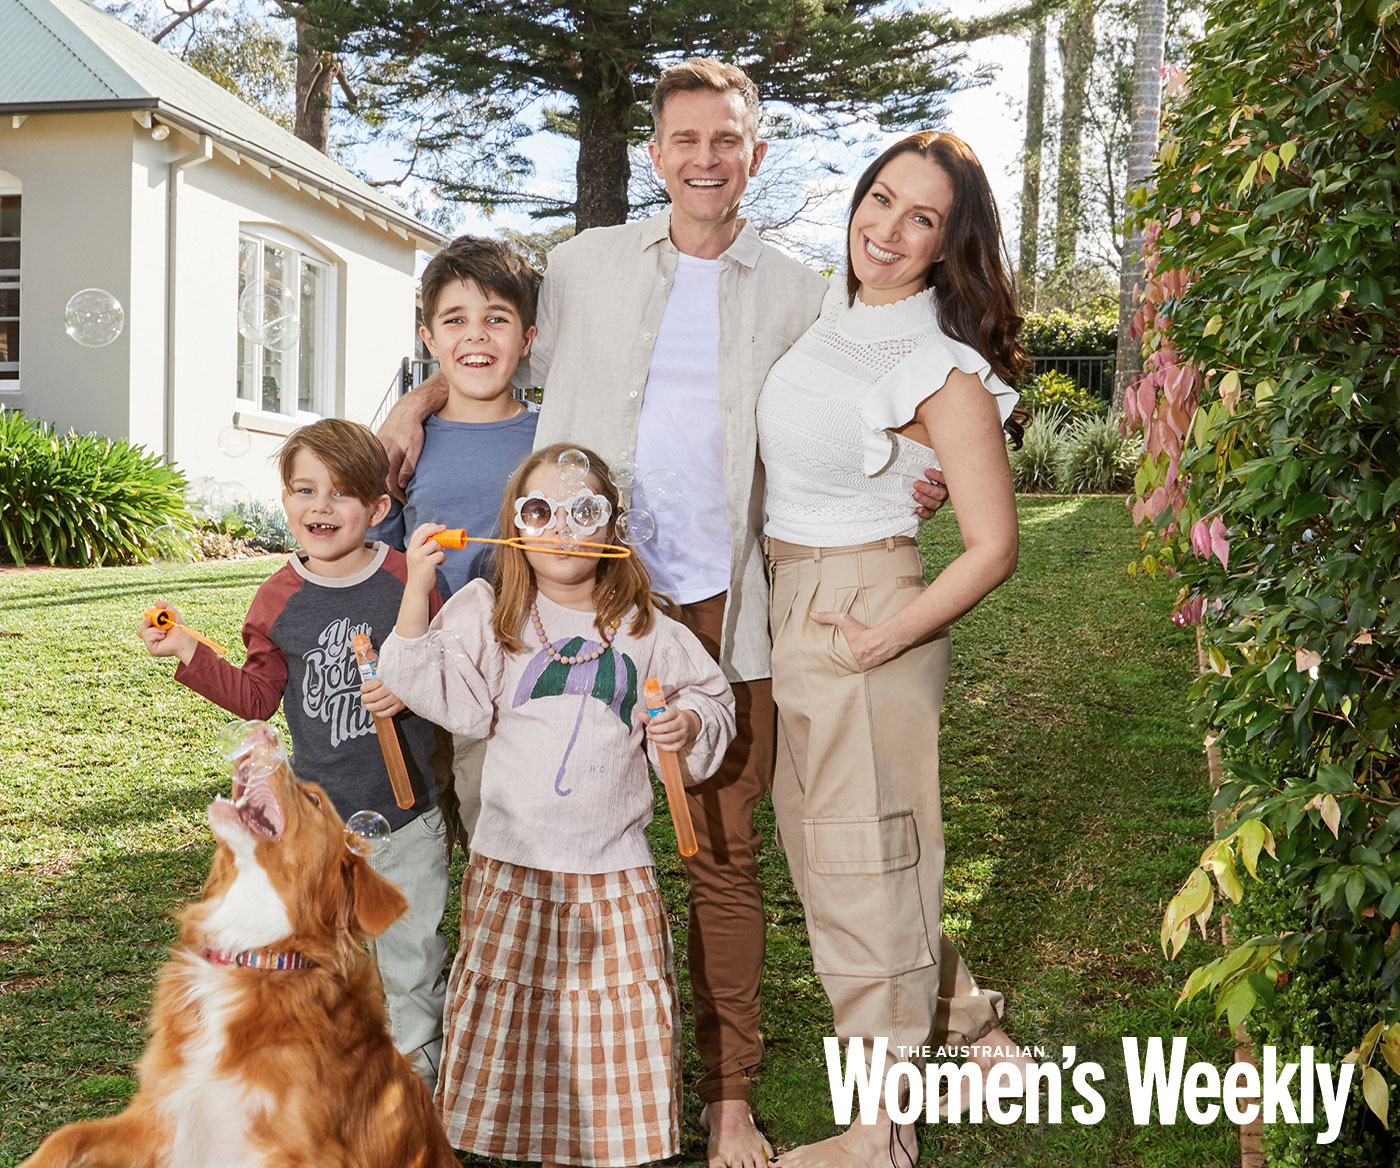 EXCLUSIVE: He’s conquered the stage and the screen, but David Campbell says his kids are his greatest achievement